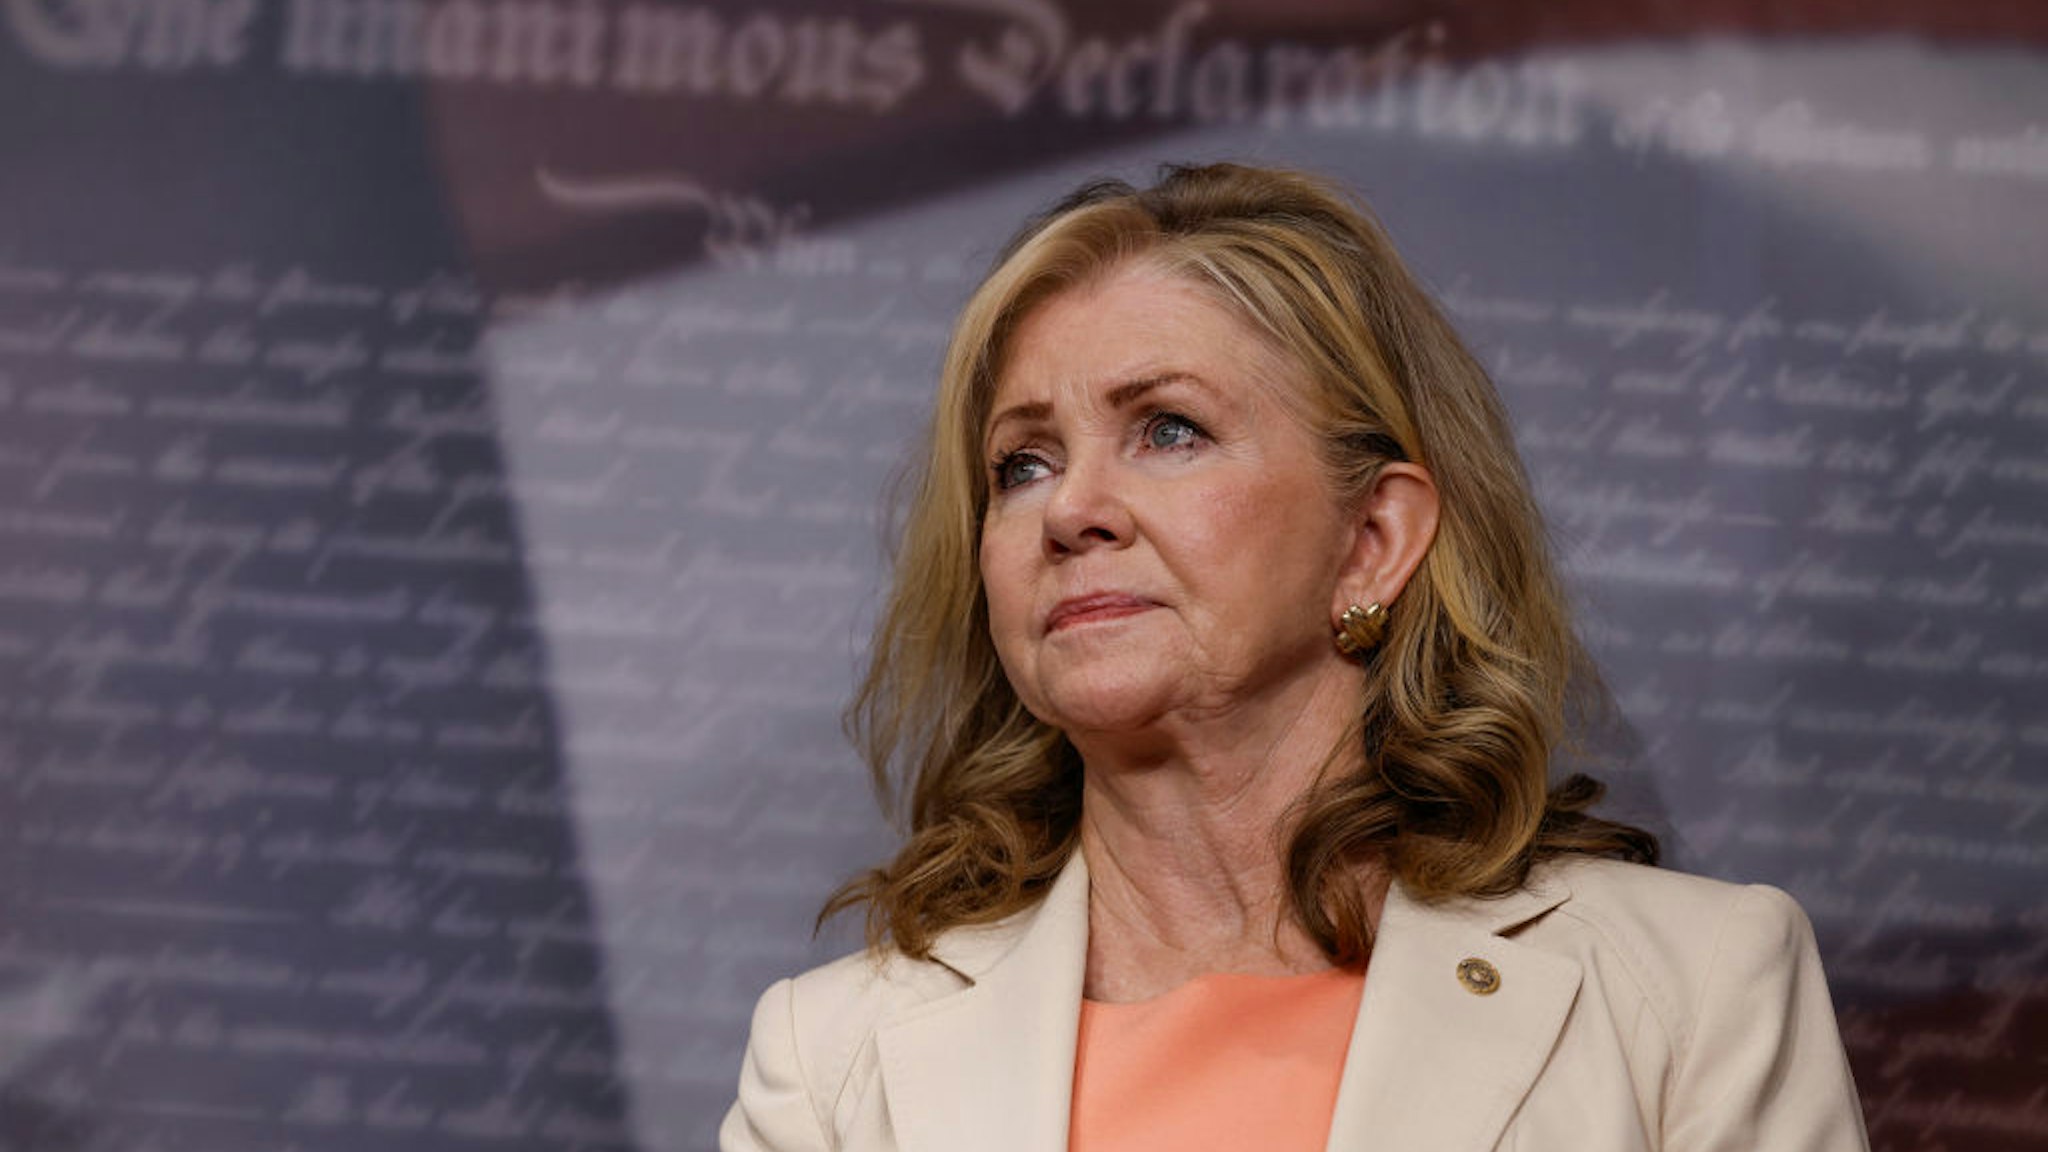 WASHINGTON, DC - JULY 19: Sen. Marsha Blackburn (R-TN) listens at a news conference on the Supreme Court at the U.S. Capitol Building on July 19, 2023 in Washington, DC. Senators with the Senate Judiciary Committee held the press conference to discuss Senate Judiciary Chairman Richard Durbin's (D-IL) upcoming ethics bill for U.S. Supreme Court justices.